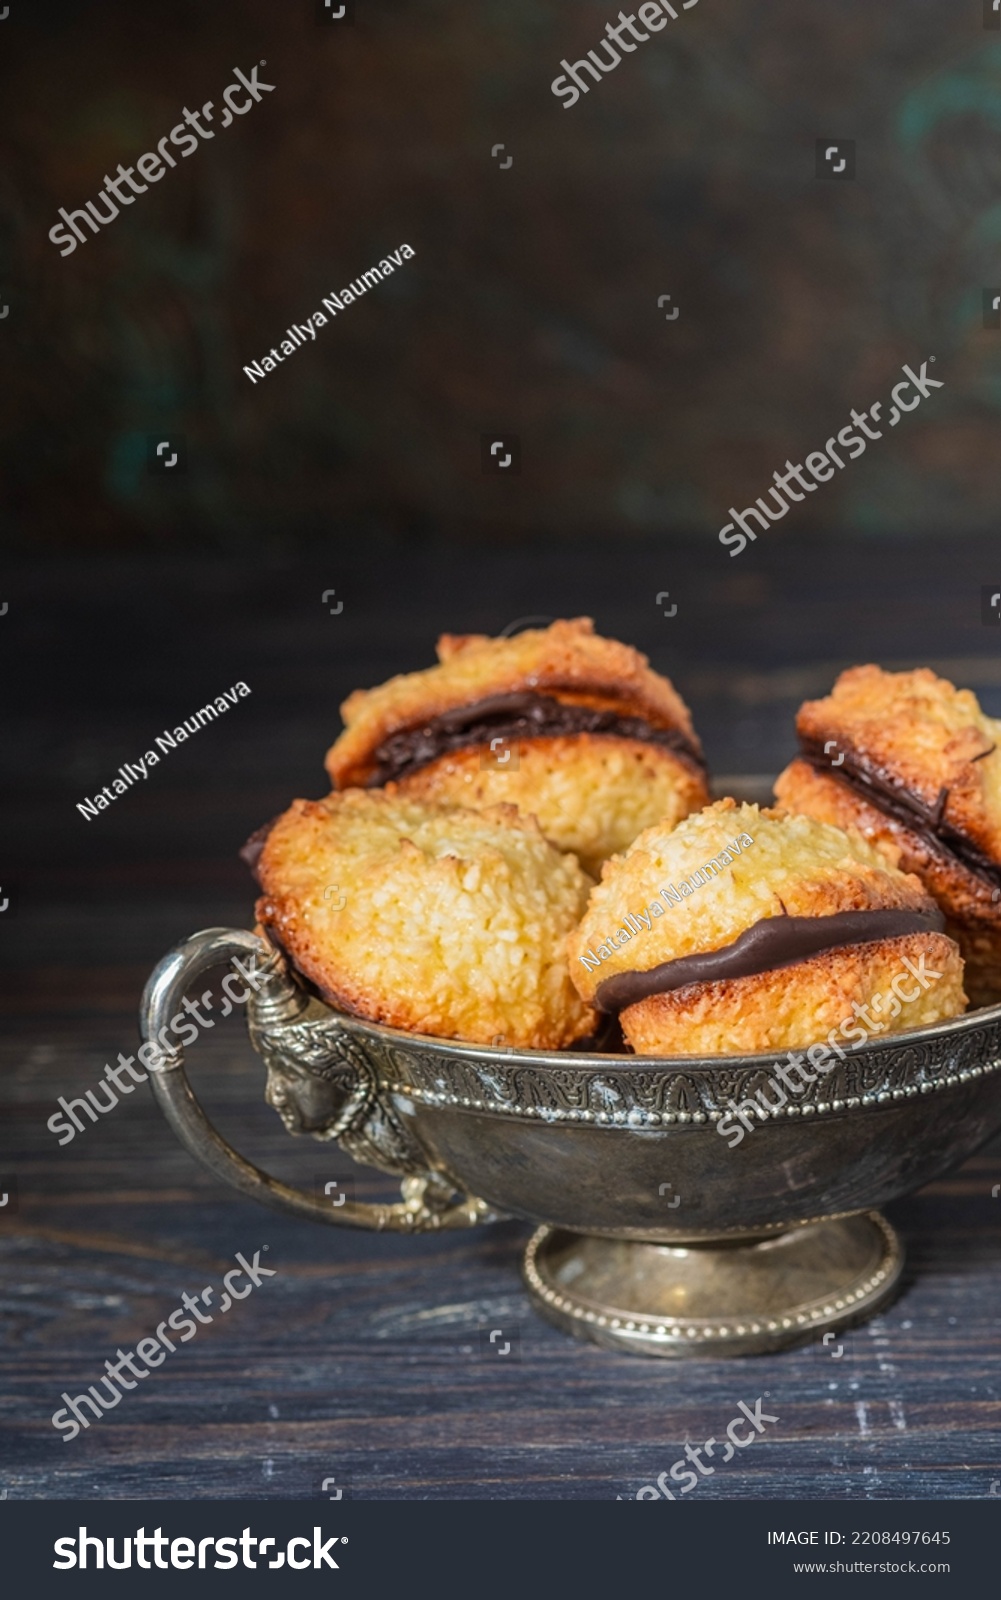 Dessert, coconut cookies with dark chocolate in a vintage metal vase on a dark background. Cookie recipes. English cuisine #2208497645